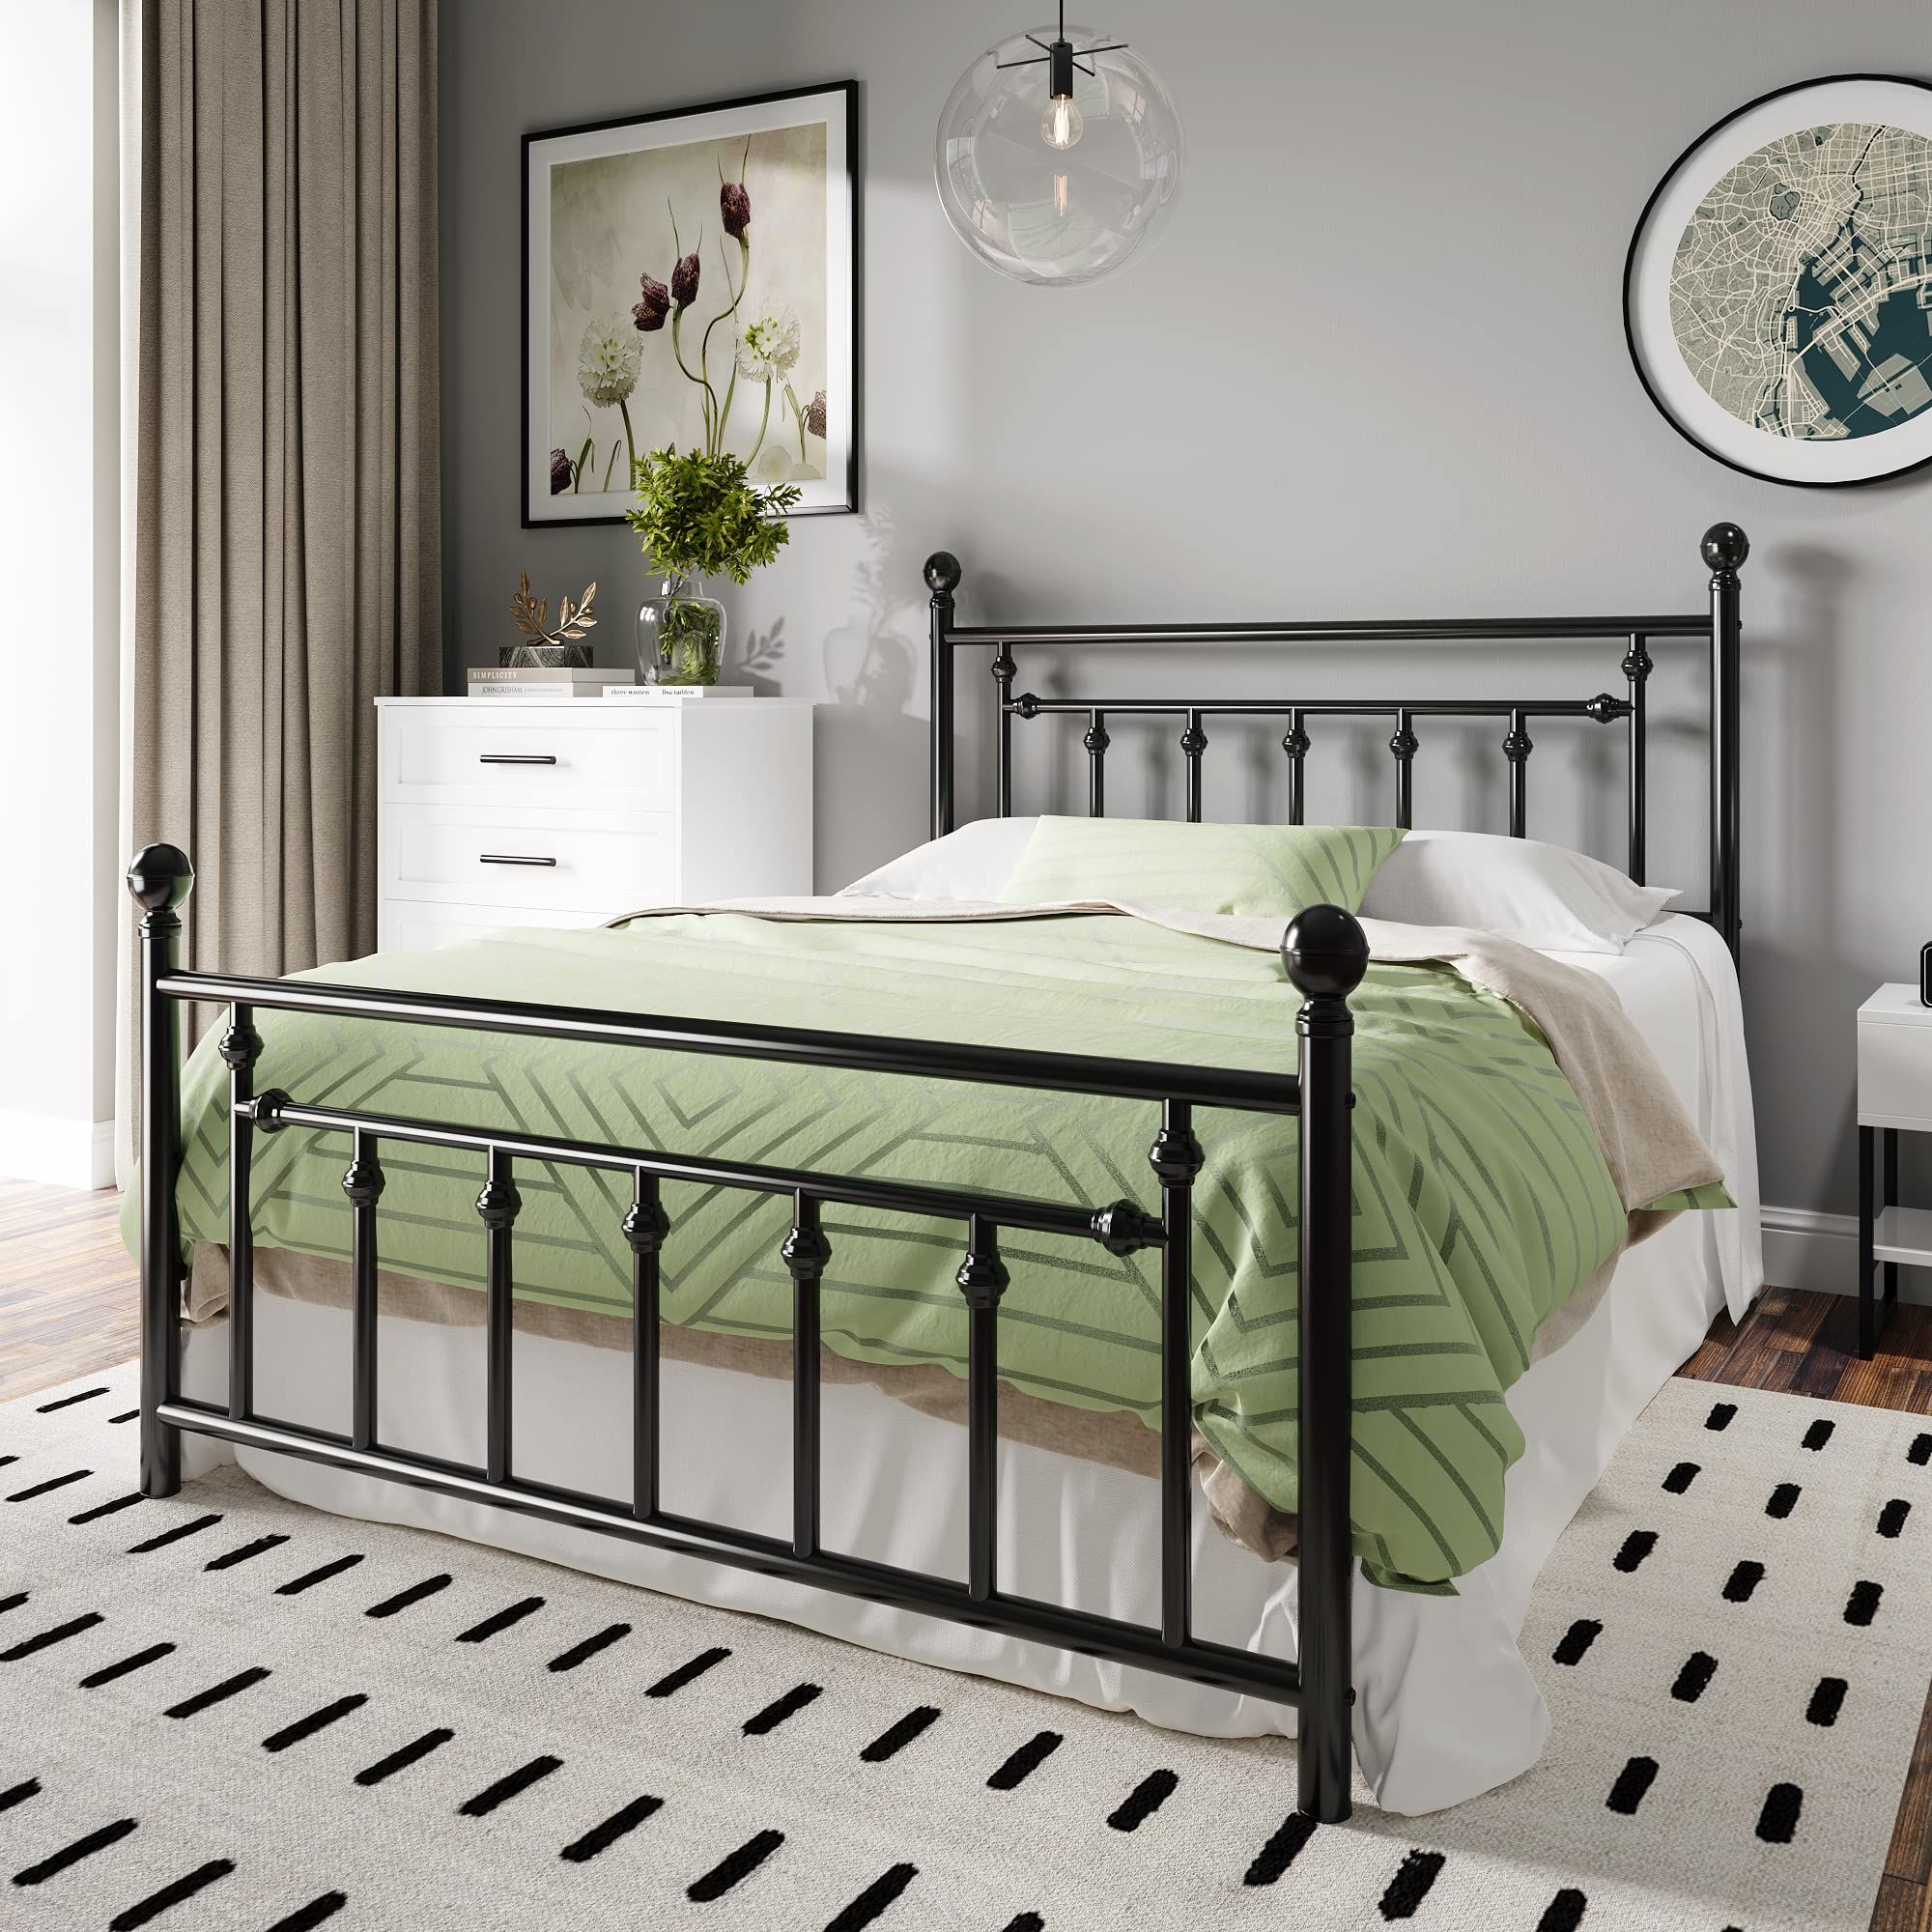 Metal Beds Sleek and Sturdy Furniture Options for Your Bedroom